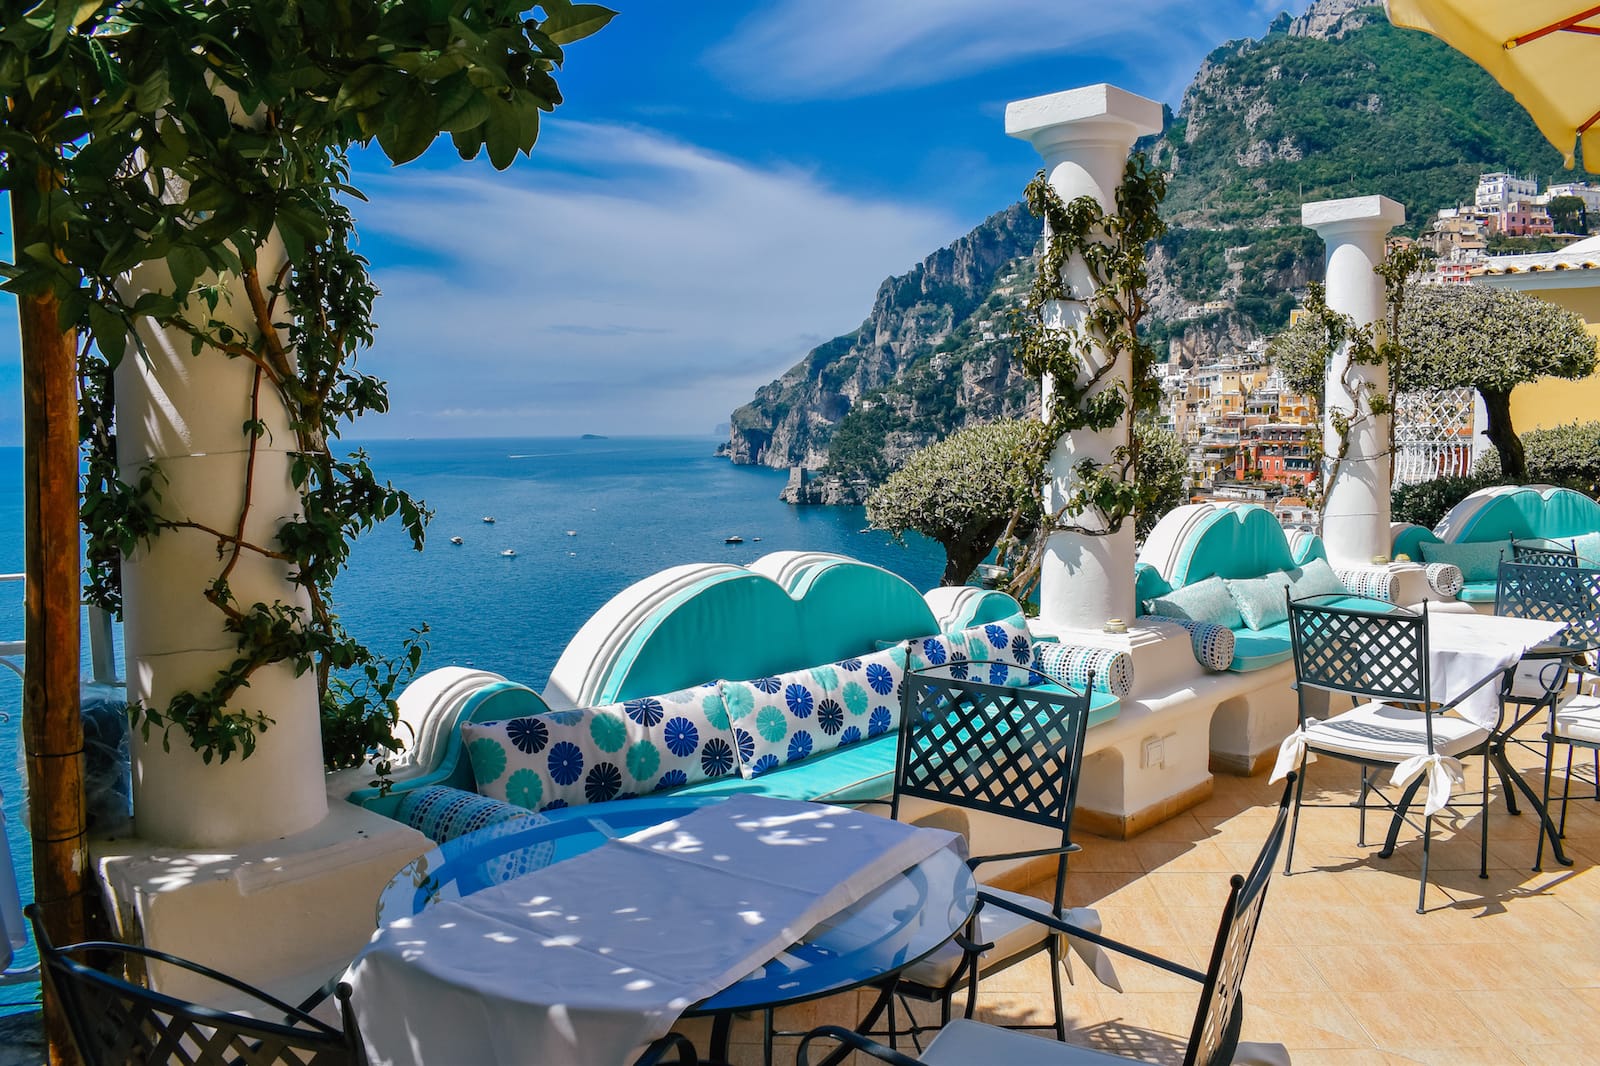 20 Things To Do In Positano | We Are Travel Girls